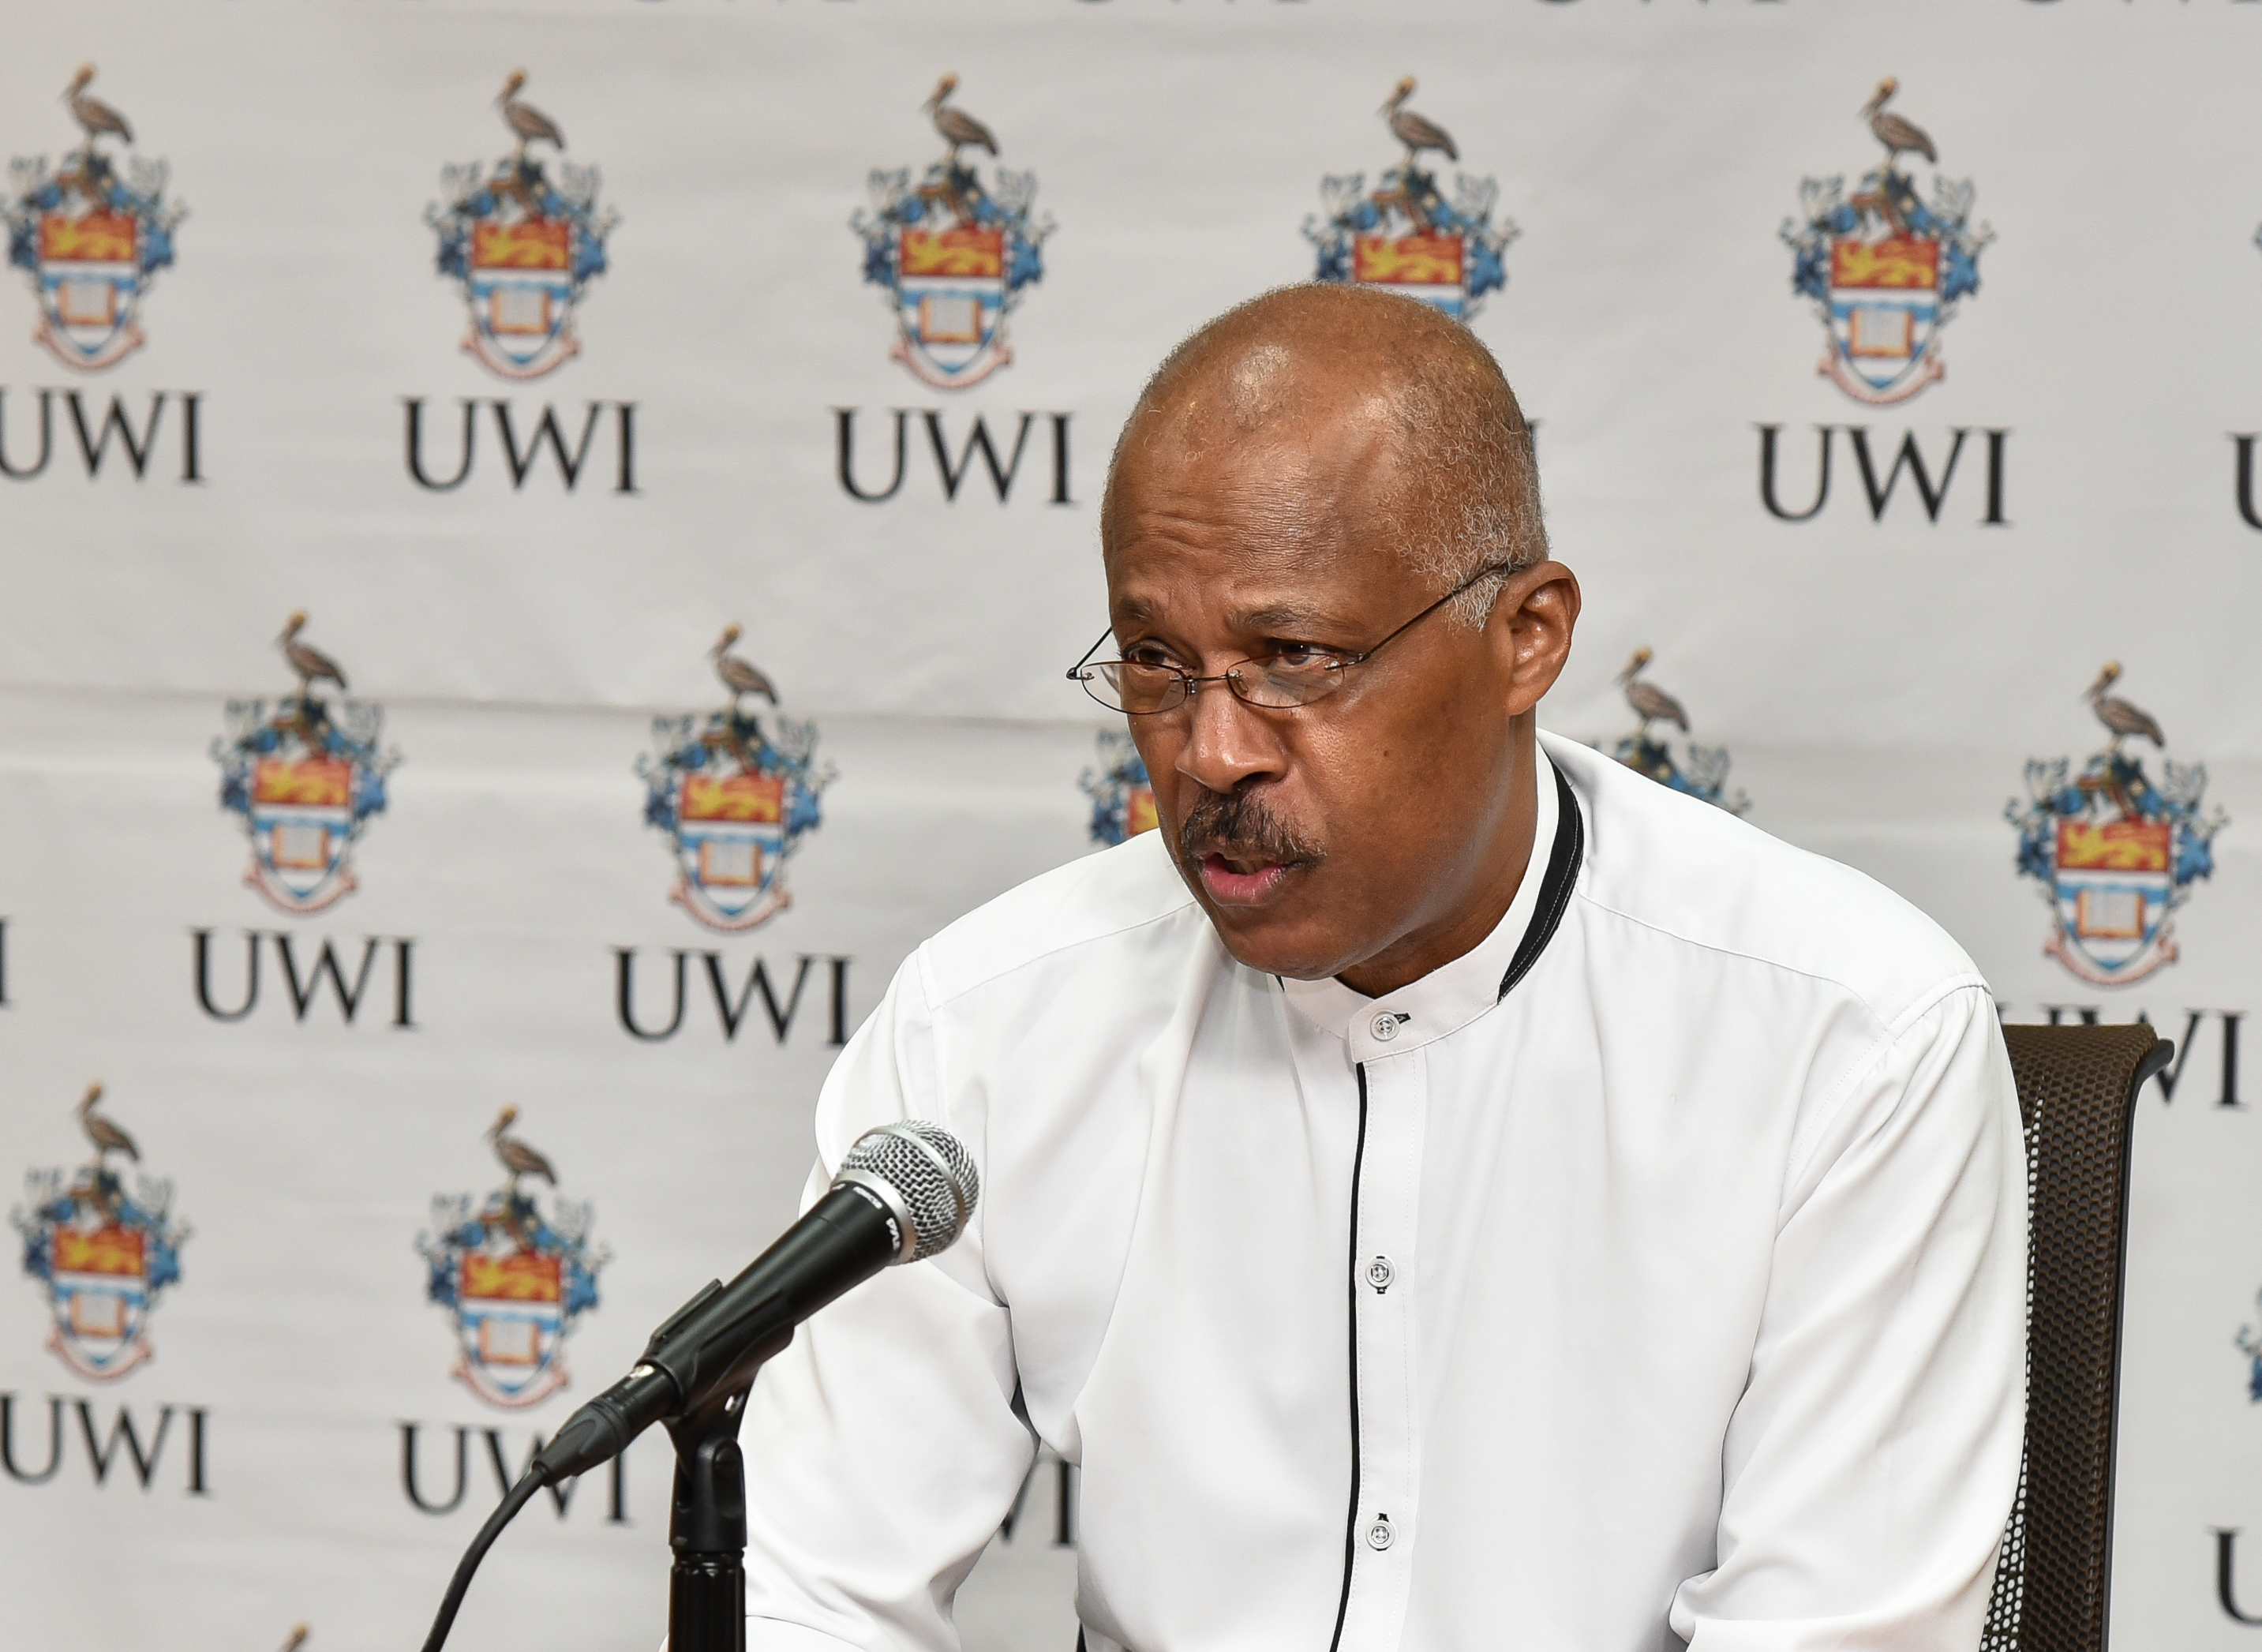 Professor Sir Hilary Beckles, Vice-Chancellor, The UWI announces the University’s latest rankings at a virtual event on Friday, July 17, 2020.